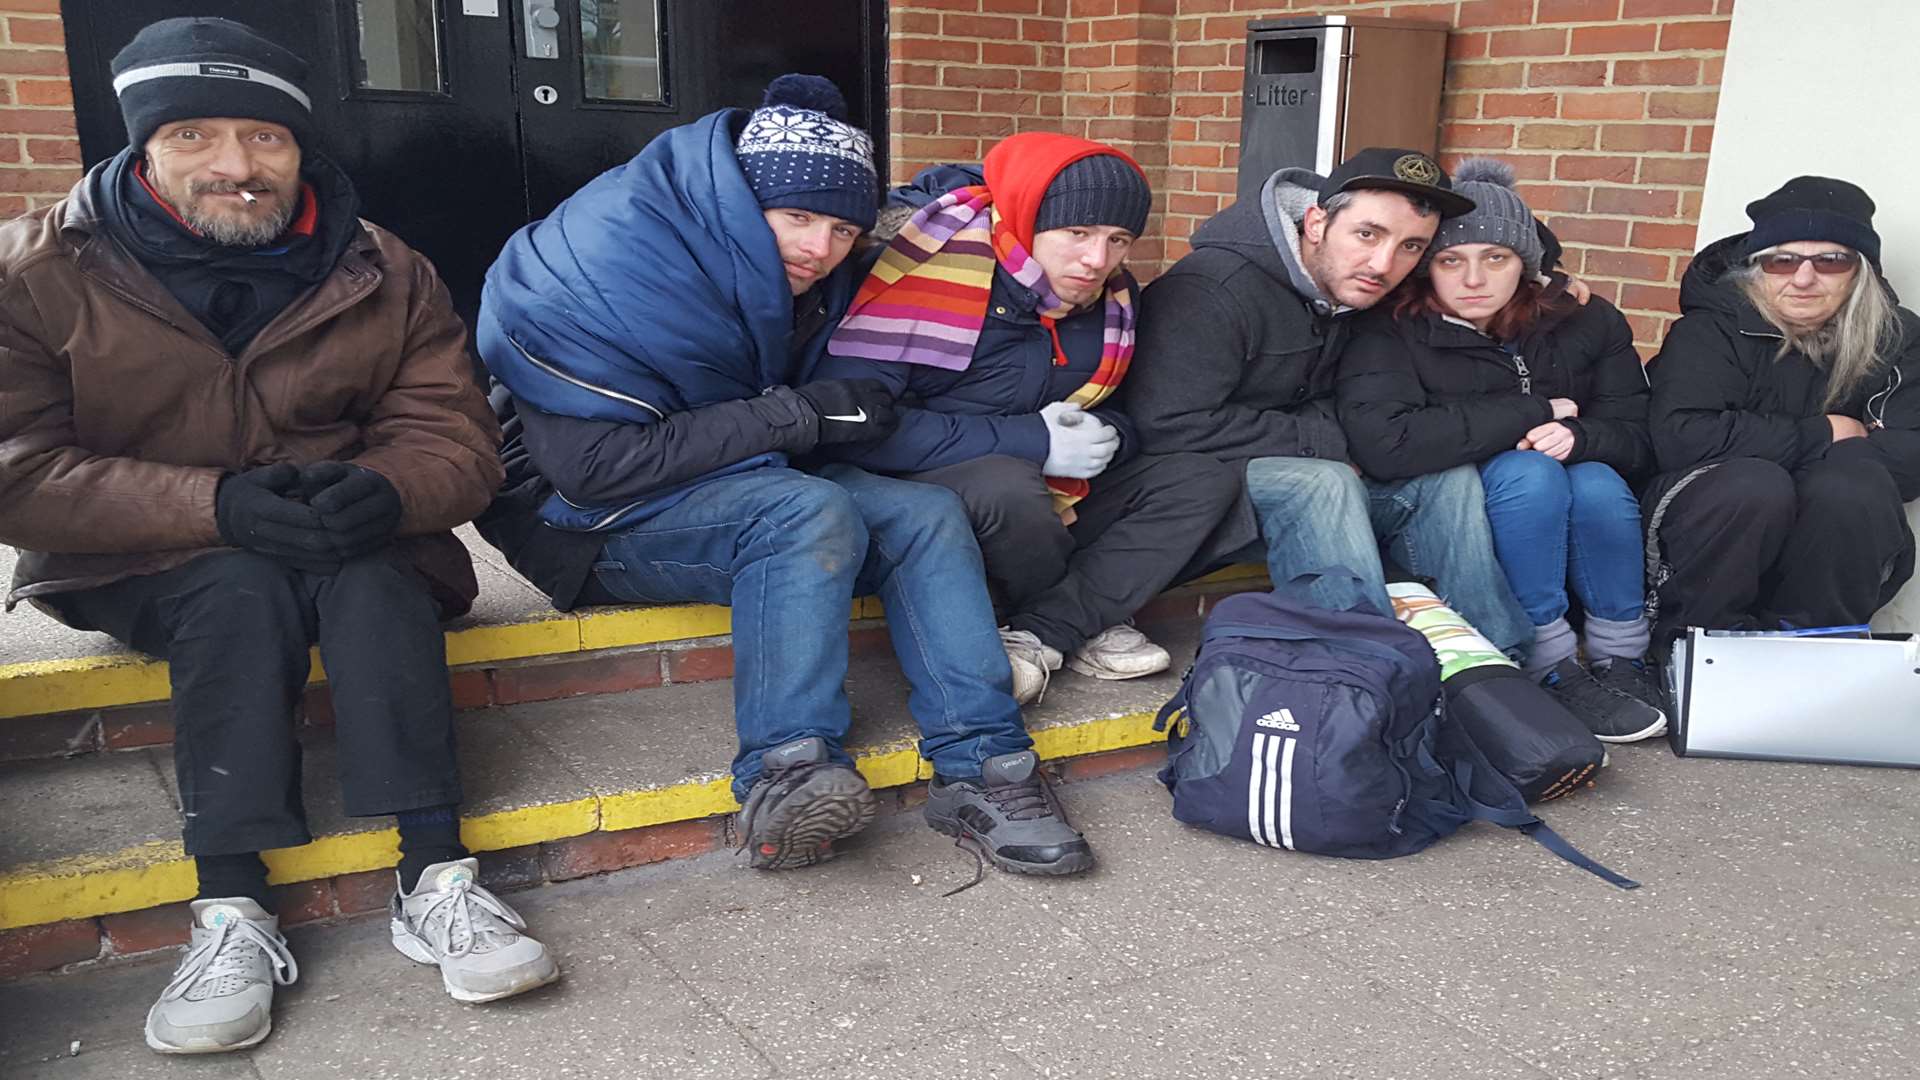 Rough sleepers say they have been left out in the cold by the closure of the Catching Lives day centre